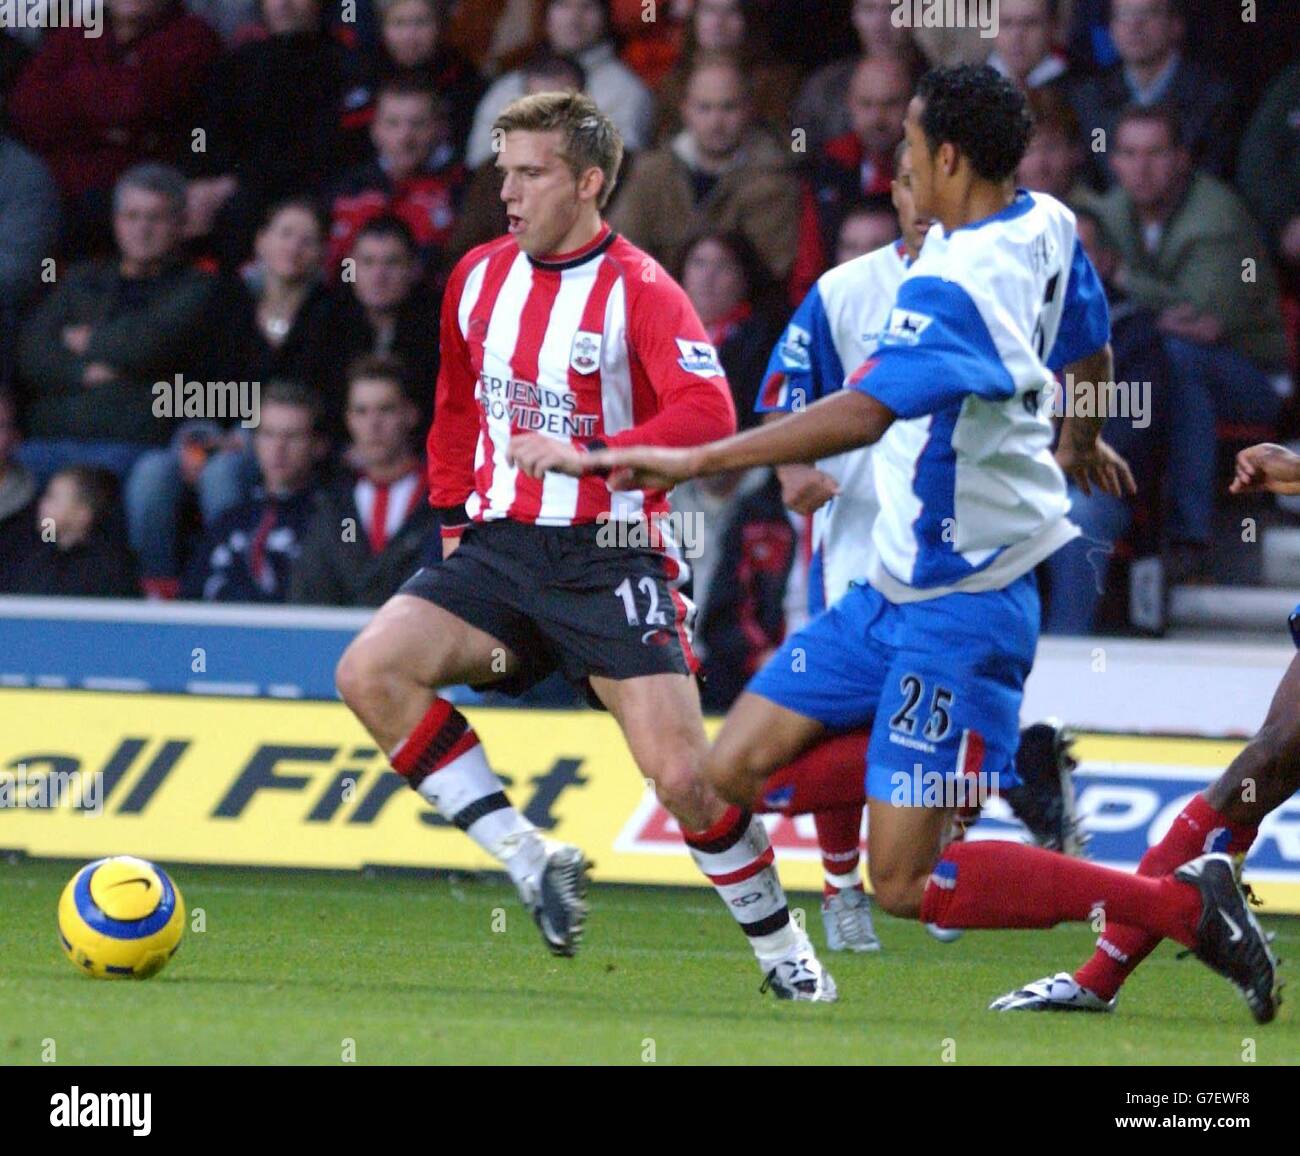 Southampton's Anders Svensson (left) tries to avoid the tackle of Crystal Palace's Fitz Hall during the Barclays Premiership match at St Mary's Stadium, Southampton, Saturday November 27, 2004. Stock Photo